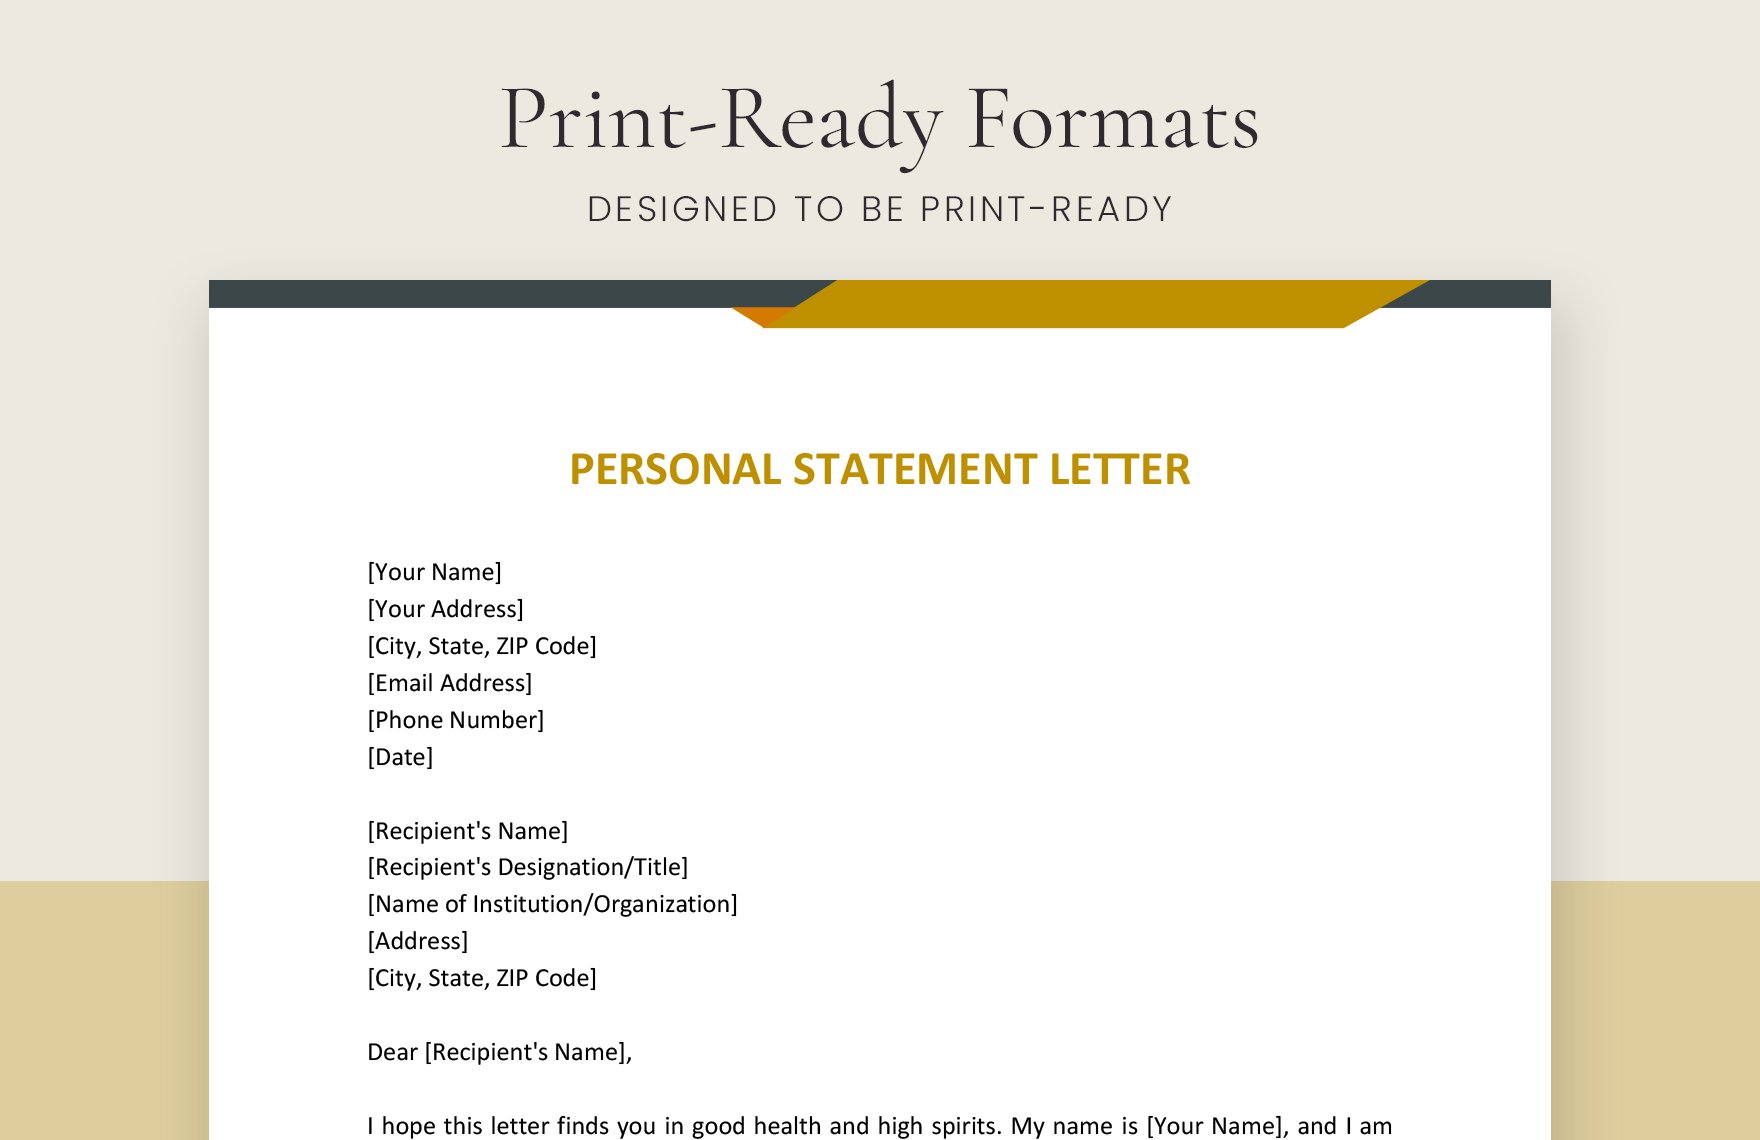 Personal Statement Letter